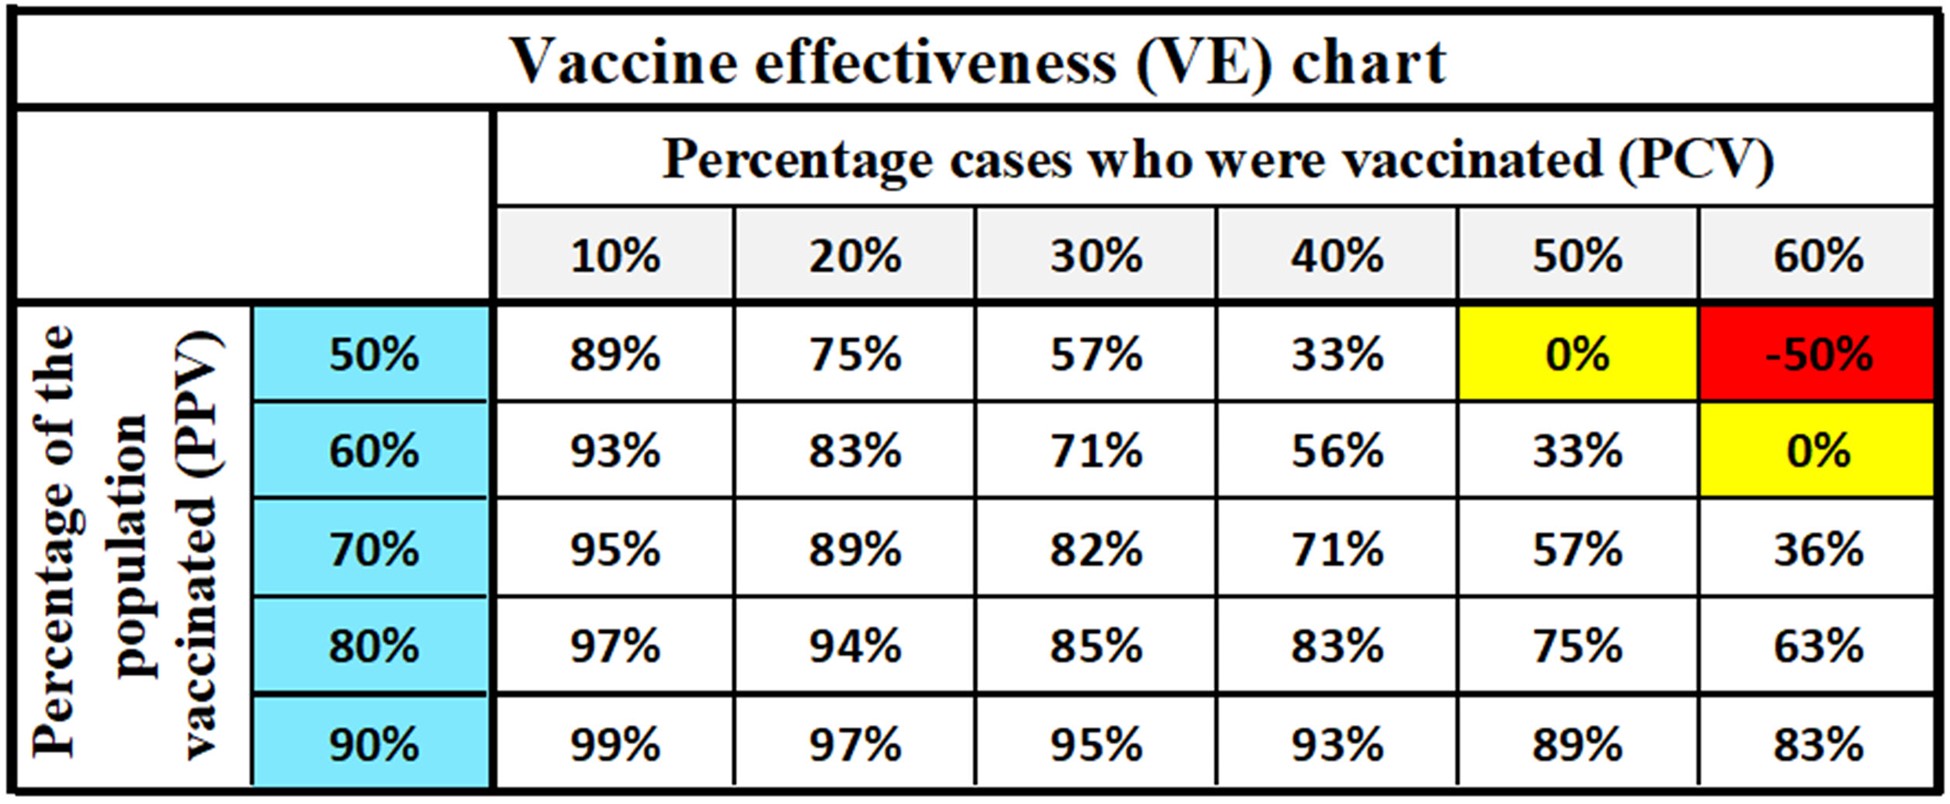 A case study on expert testimony and accuracy in vaccine effectiveness reporting